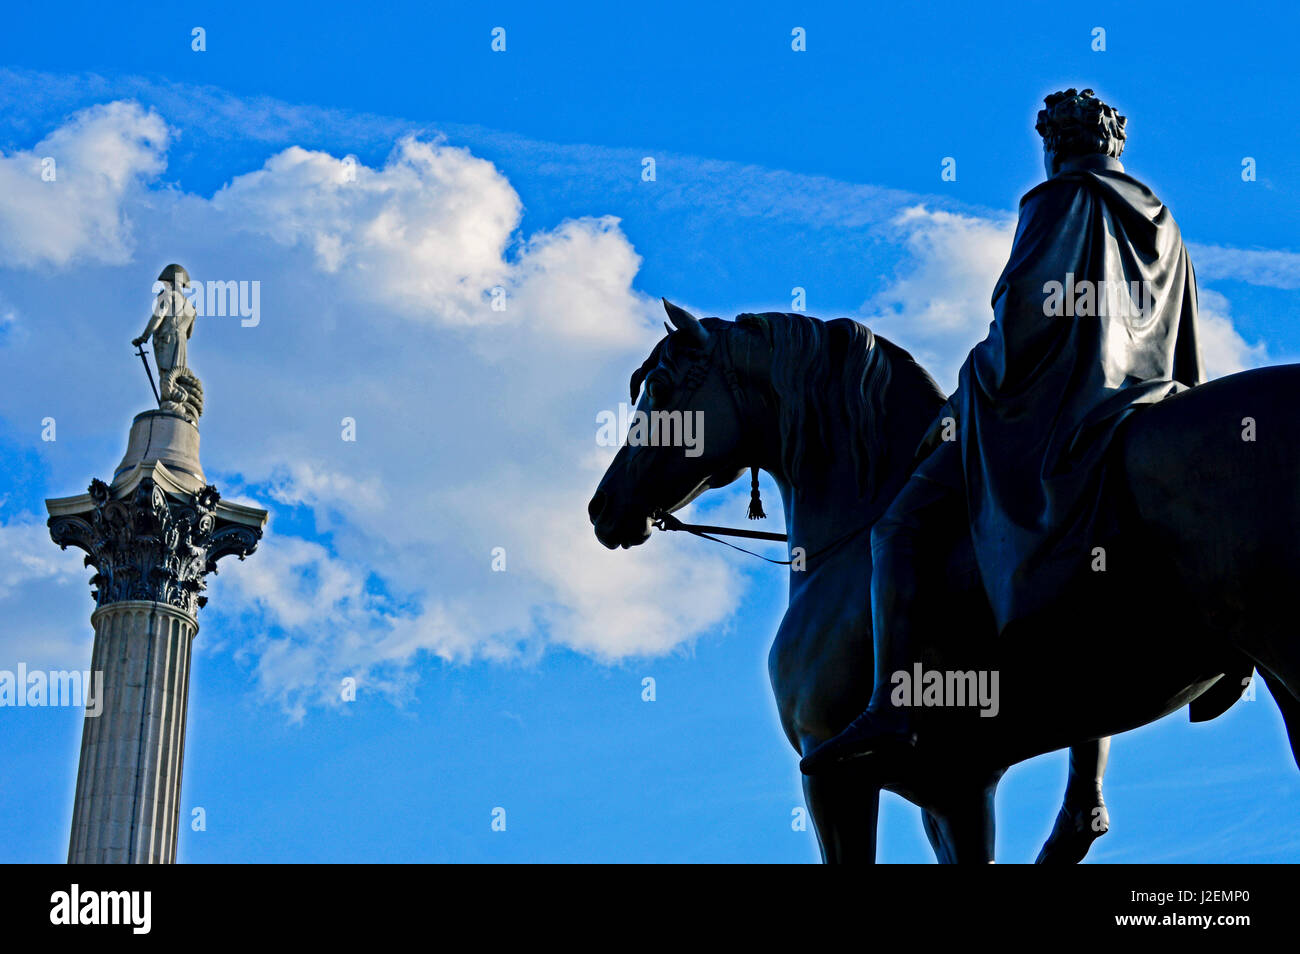 Europe, United Kingdom, England, Central London, City of Westminster. Nelson's Column at Trafalgar Square showing bronze equestrian statue of King George IV by Sir Francis Chantrey. Stock Photo